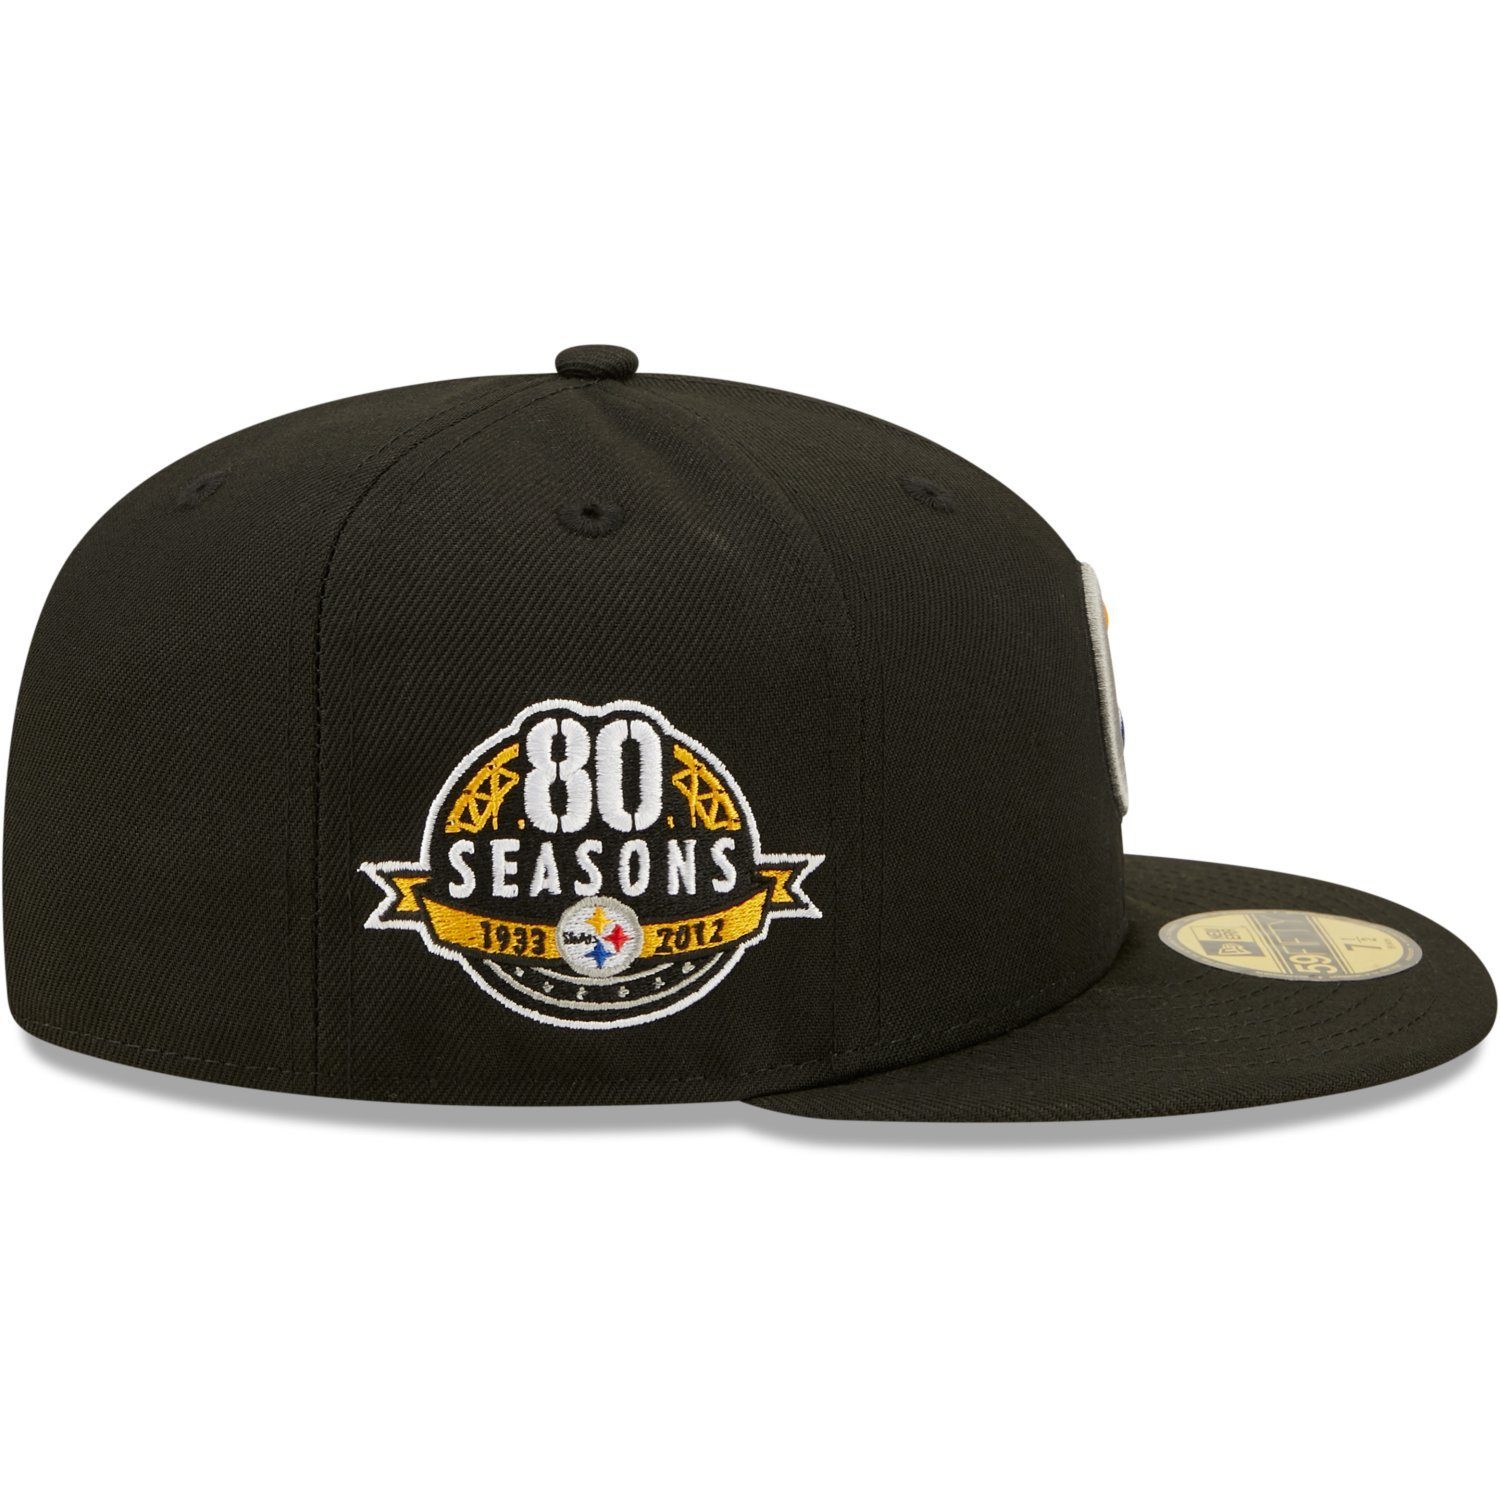 New Era Fitted 80 Seasons Steelers Pittsburgh 59Fifty Cap